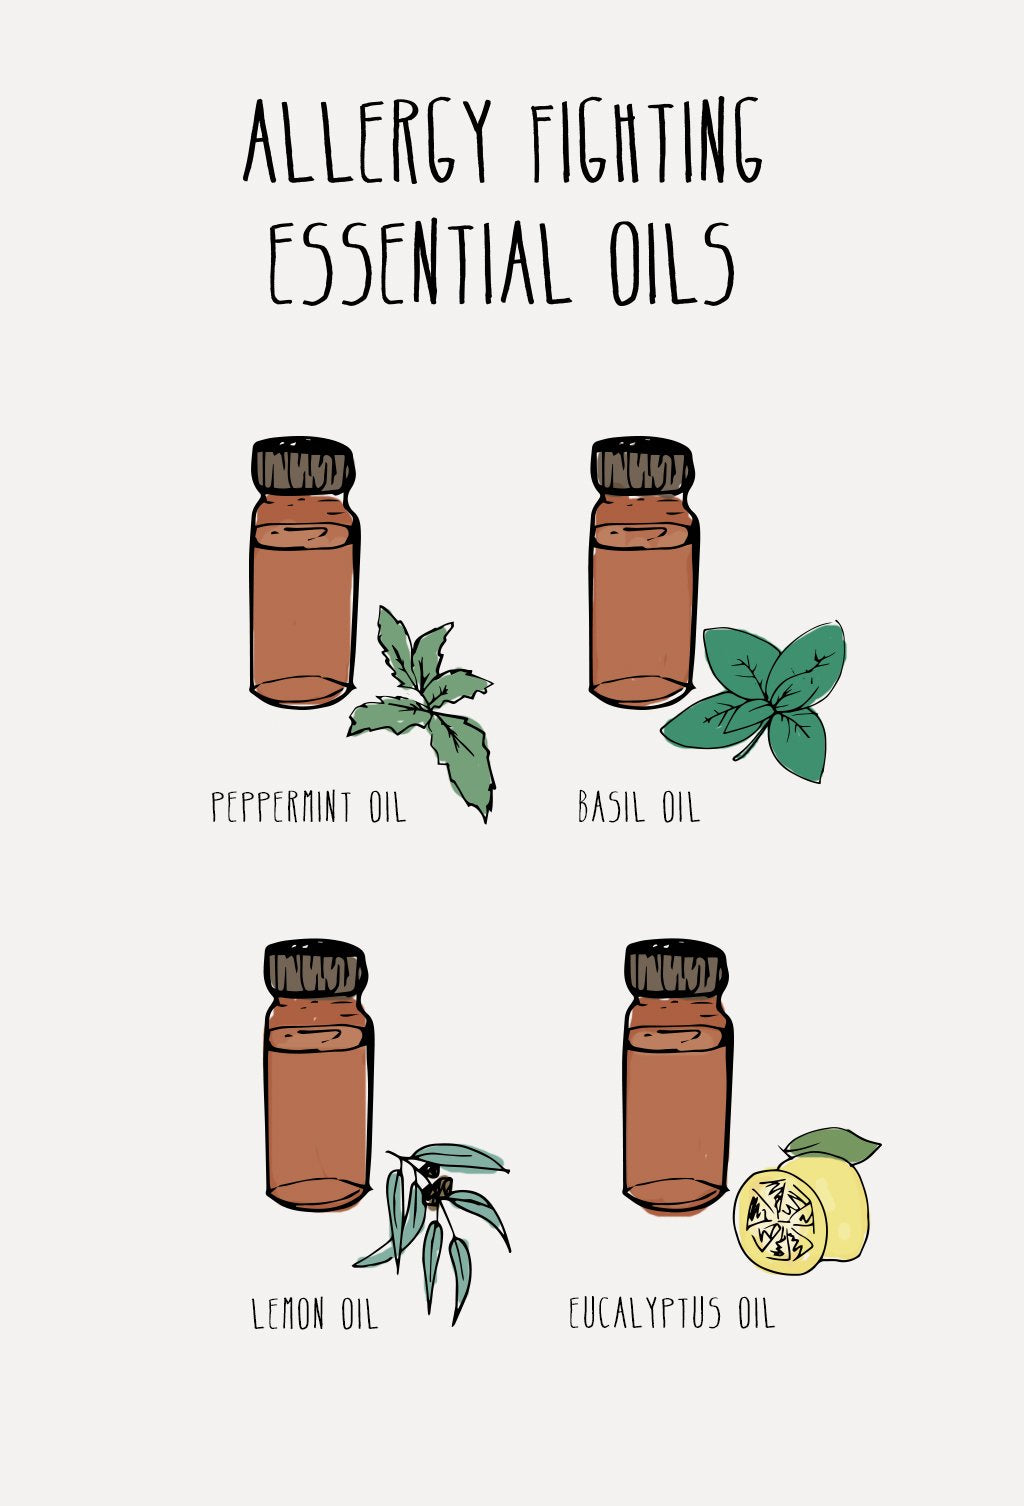 NATURAL WAYS TO TREAT ALLERGY SYMPTOMS (PART 3 OF 3) - ESSENTIAL OILS